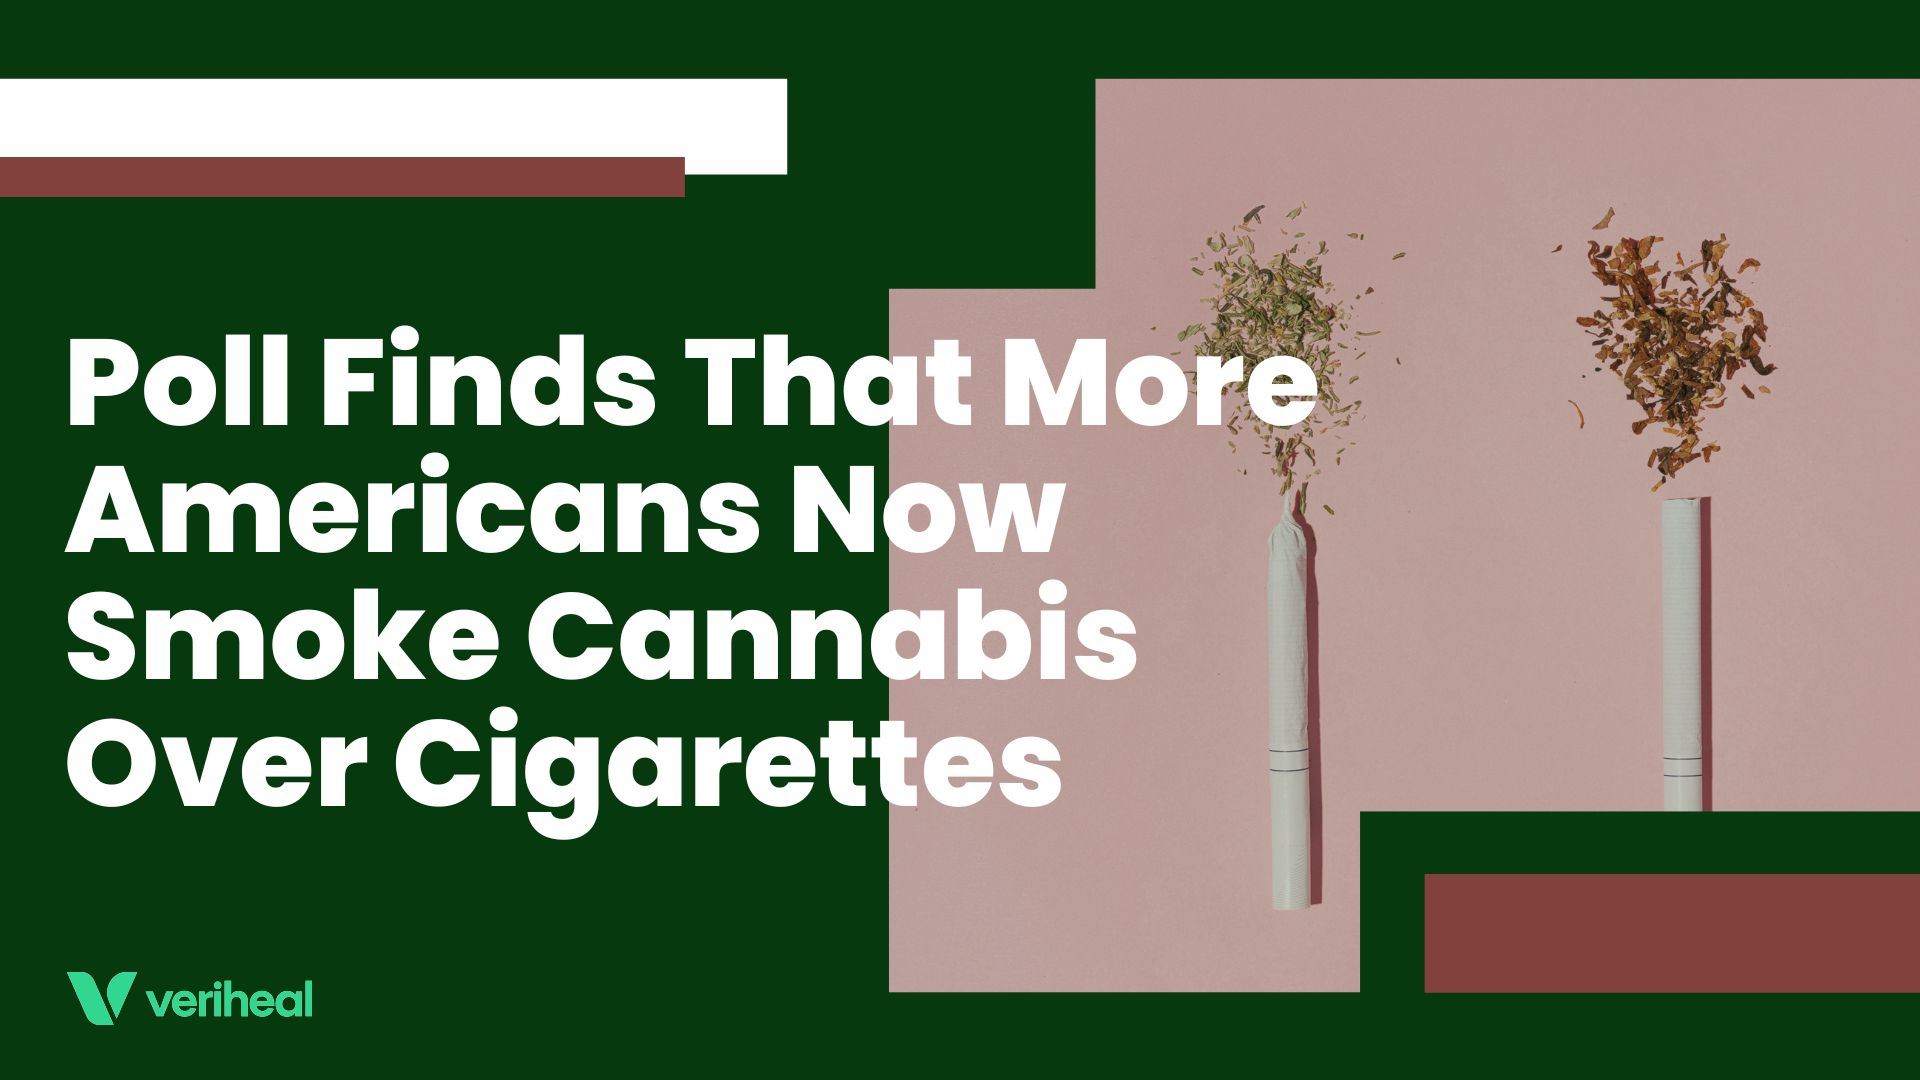 Poll Finds That More Americans Now Smoke Cannabis Over Cigarettes